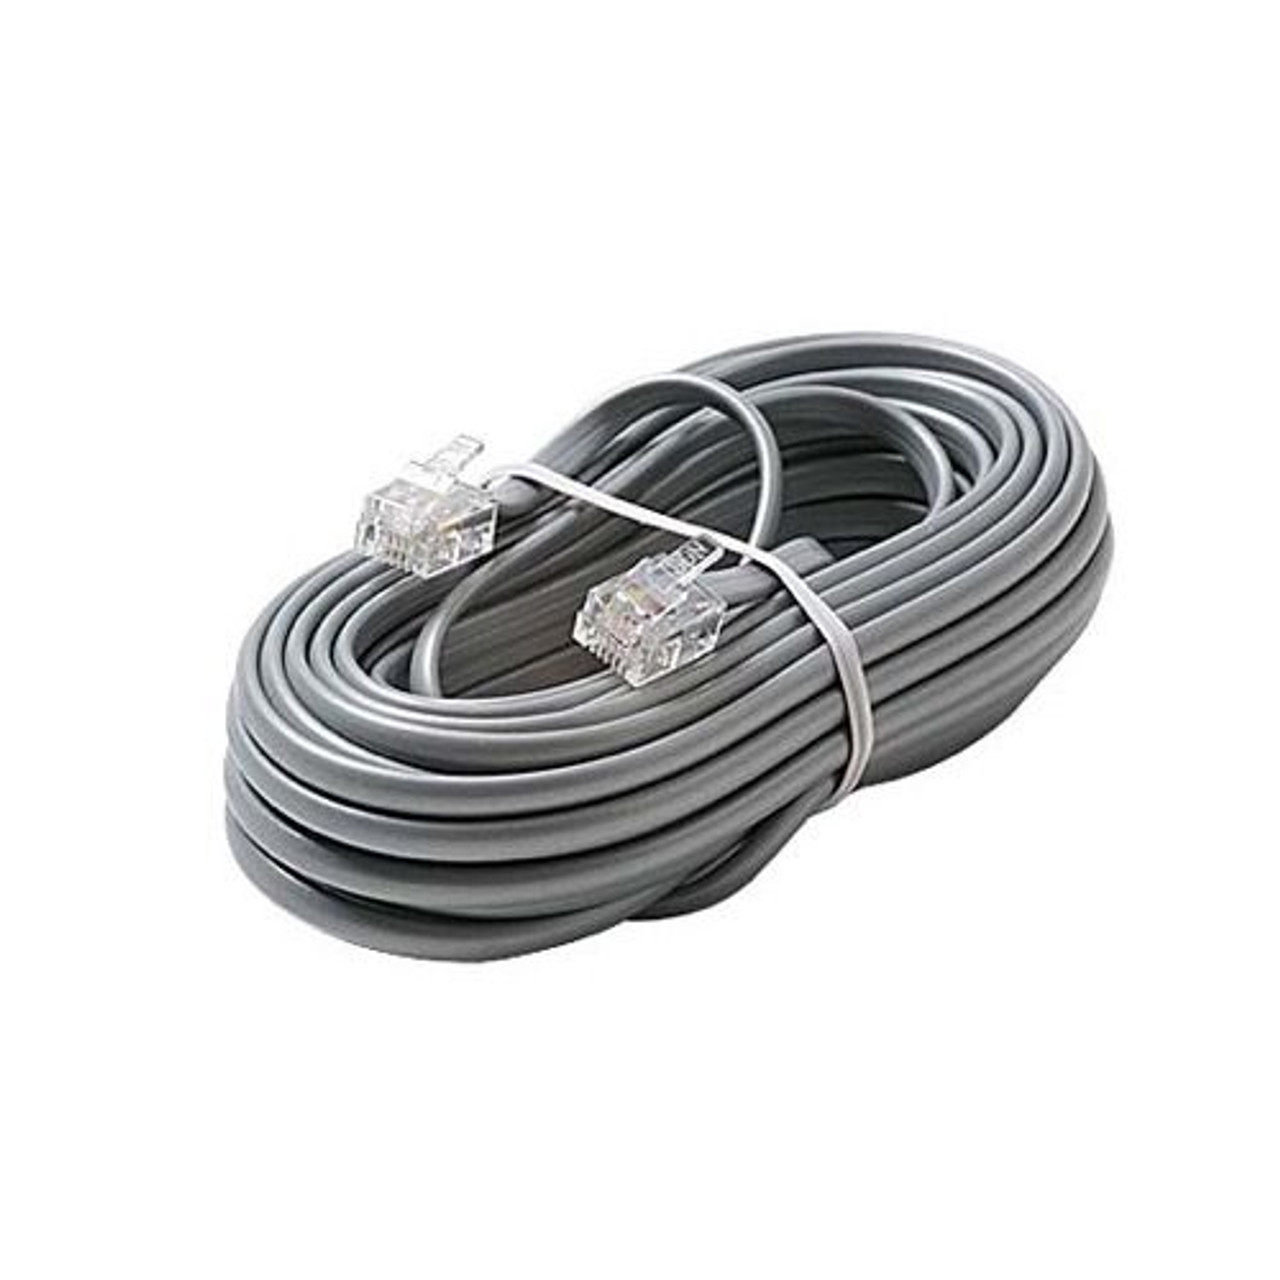 Eagle 50' FT Telephone Line Cord Satin Silver Modular 4 Copper Wire Conductor RJ11 Voice 6P4C 28 AWG RJ11 Plug Connector Each End 6P4C Flat Phone Cord Cable RJ-11 Cross-Wired for VoIP